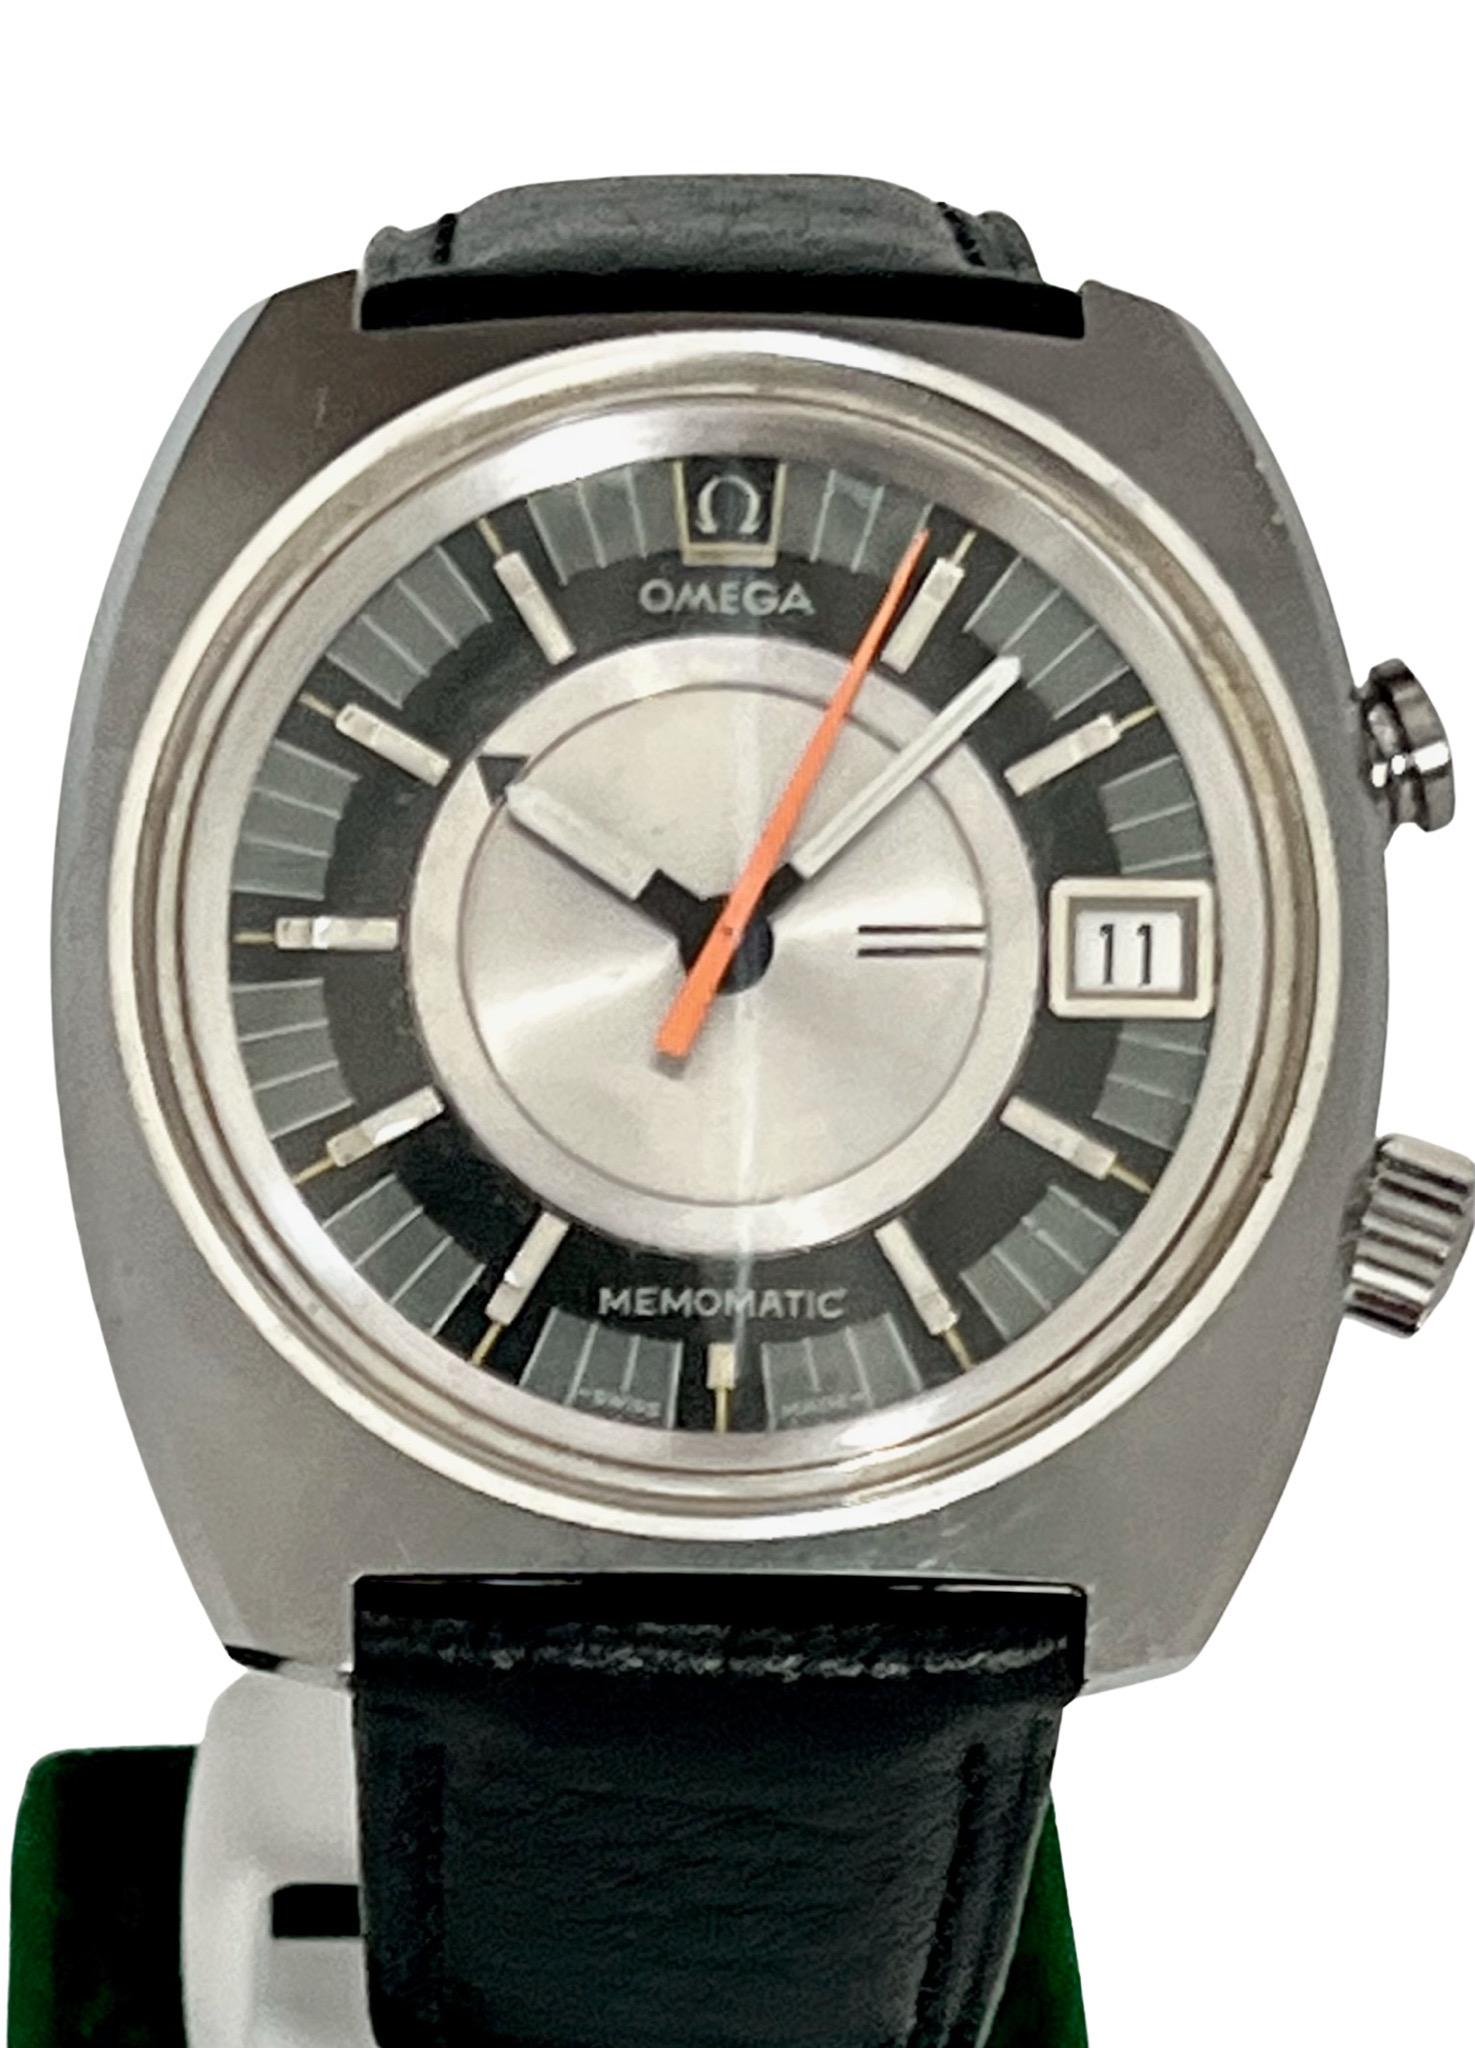 Stylish Vintage Omega Seamaster Memomatic, Model Ref. 166.072. Automatic winding calibre 980 movement. This is an excellent example of a fast appreciating watch model.

Stainless steel tonneau case with brushed sunburst finish, screw down case back